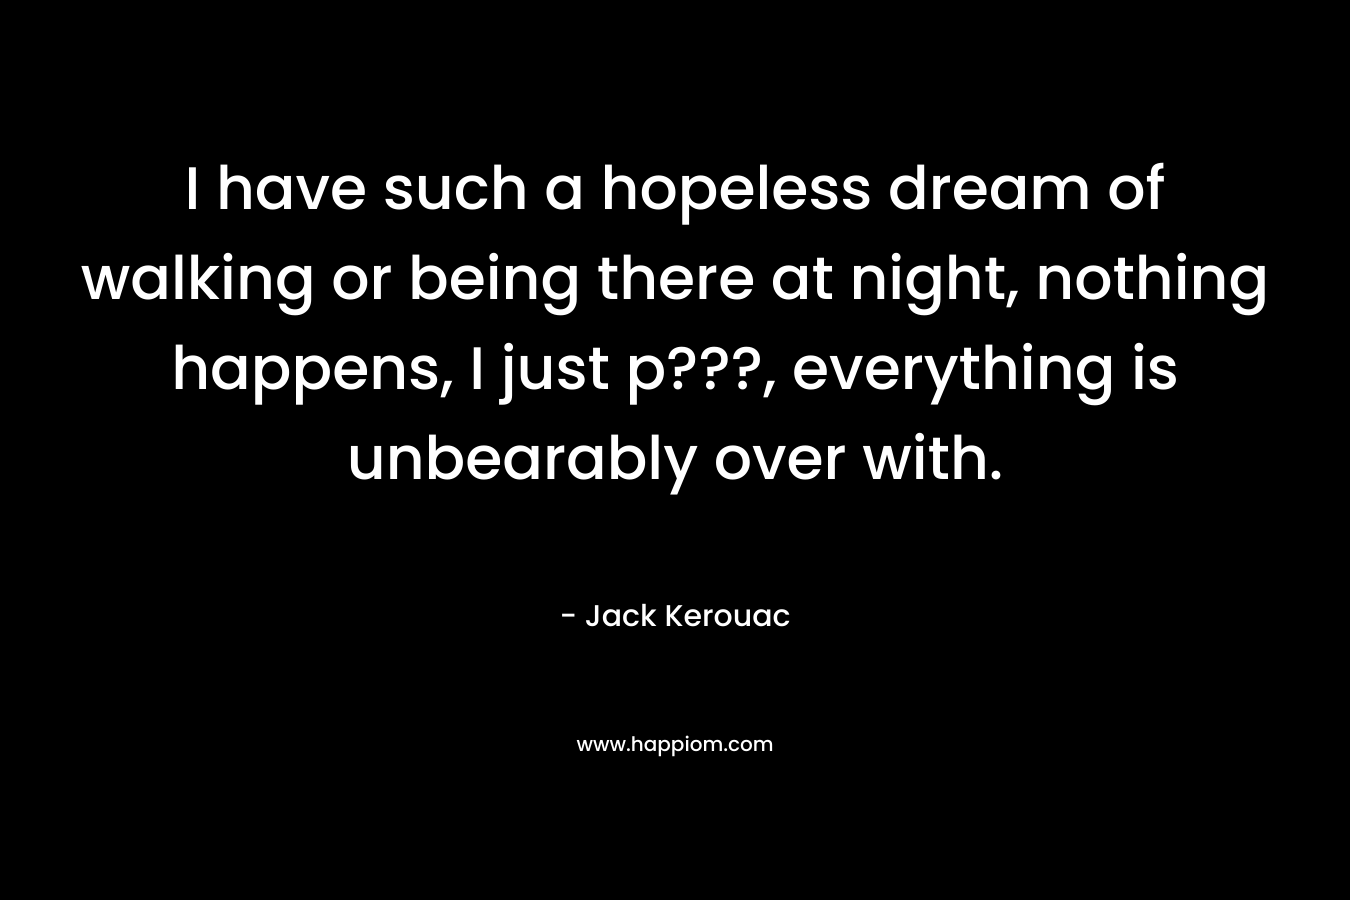 I have such a hopeless dream of walking or being there at night, nothing happens, I just p???, everything is unbearably over with. – Jack Kerouac